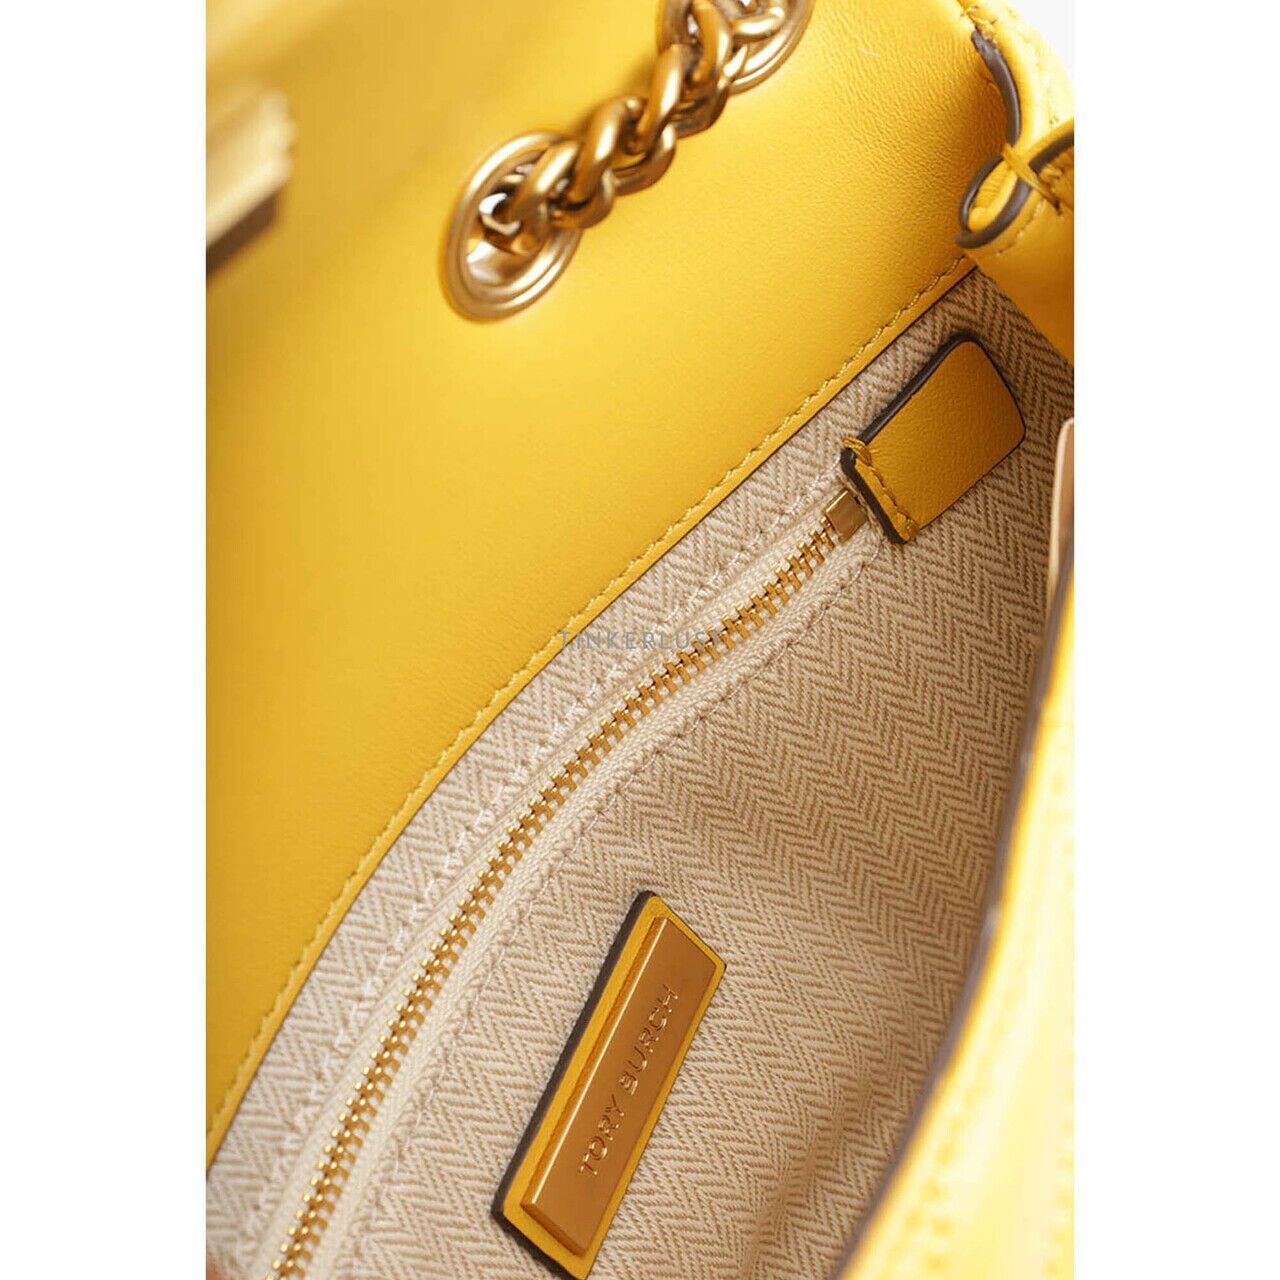 Tory Burch Small Kira Chevron Convertible in Golden Sunset with Rolled Brass Hardware Shoulder Bag